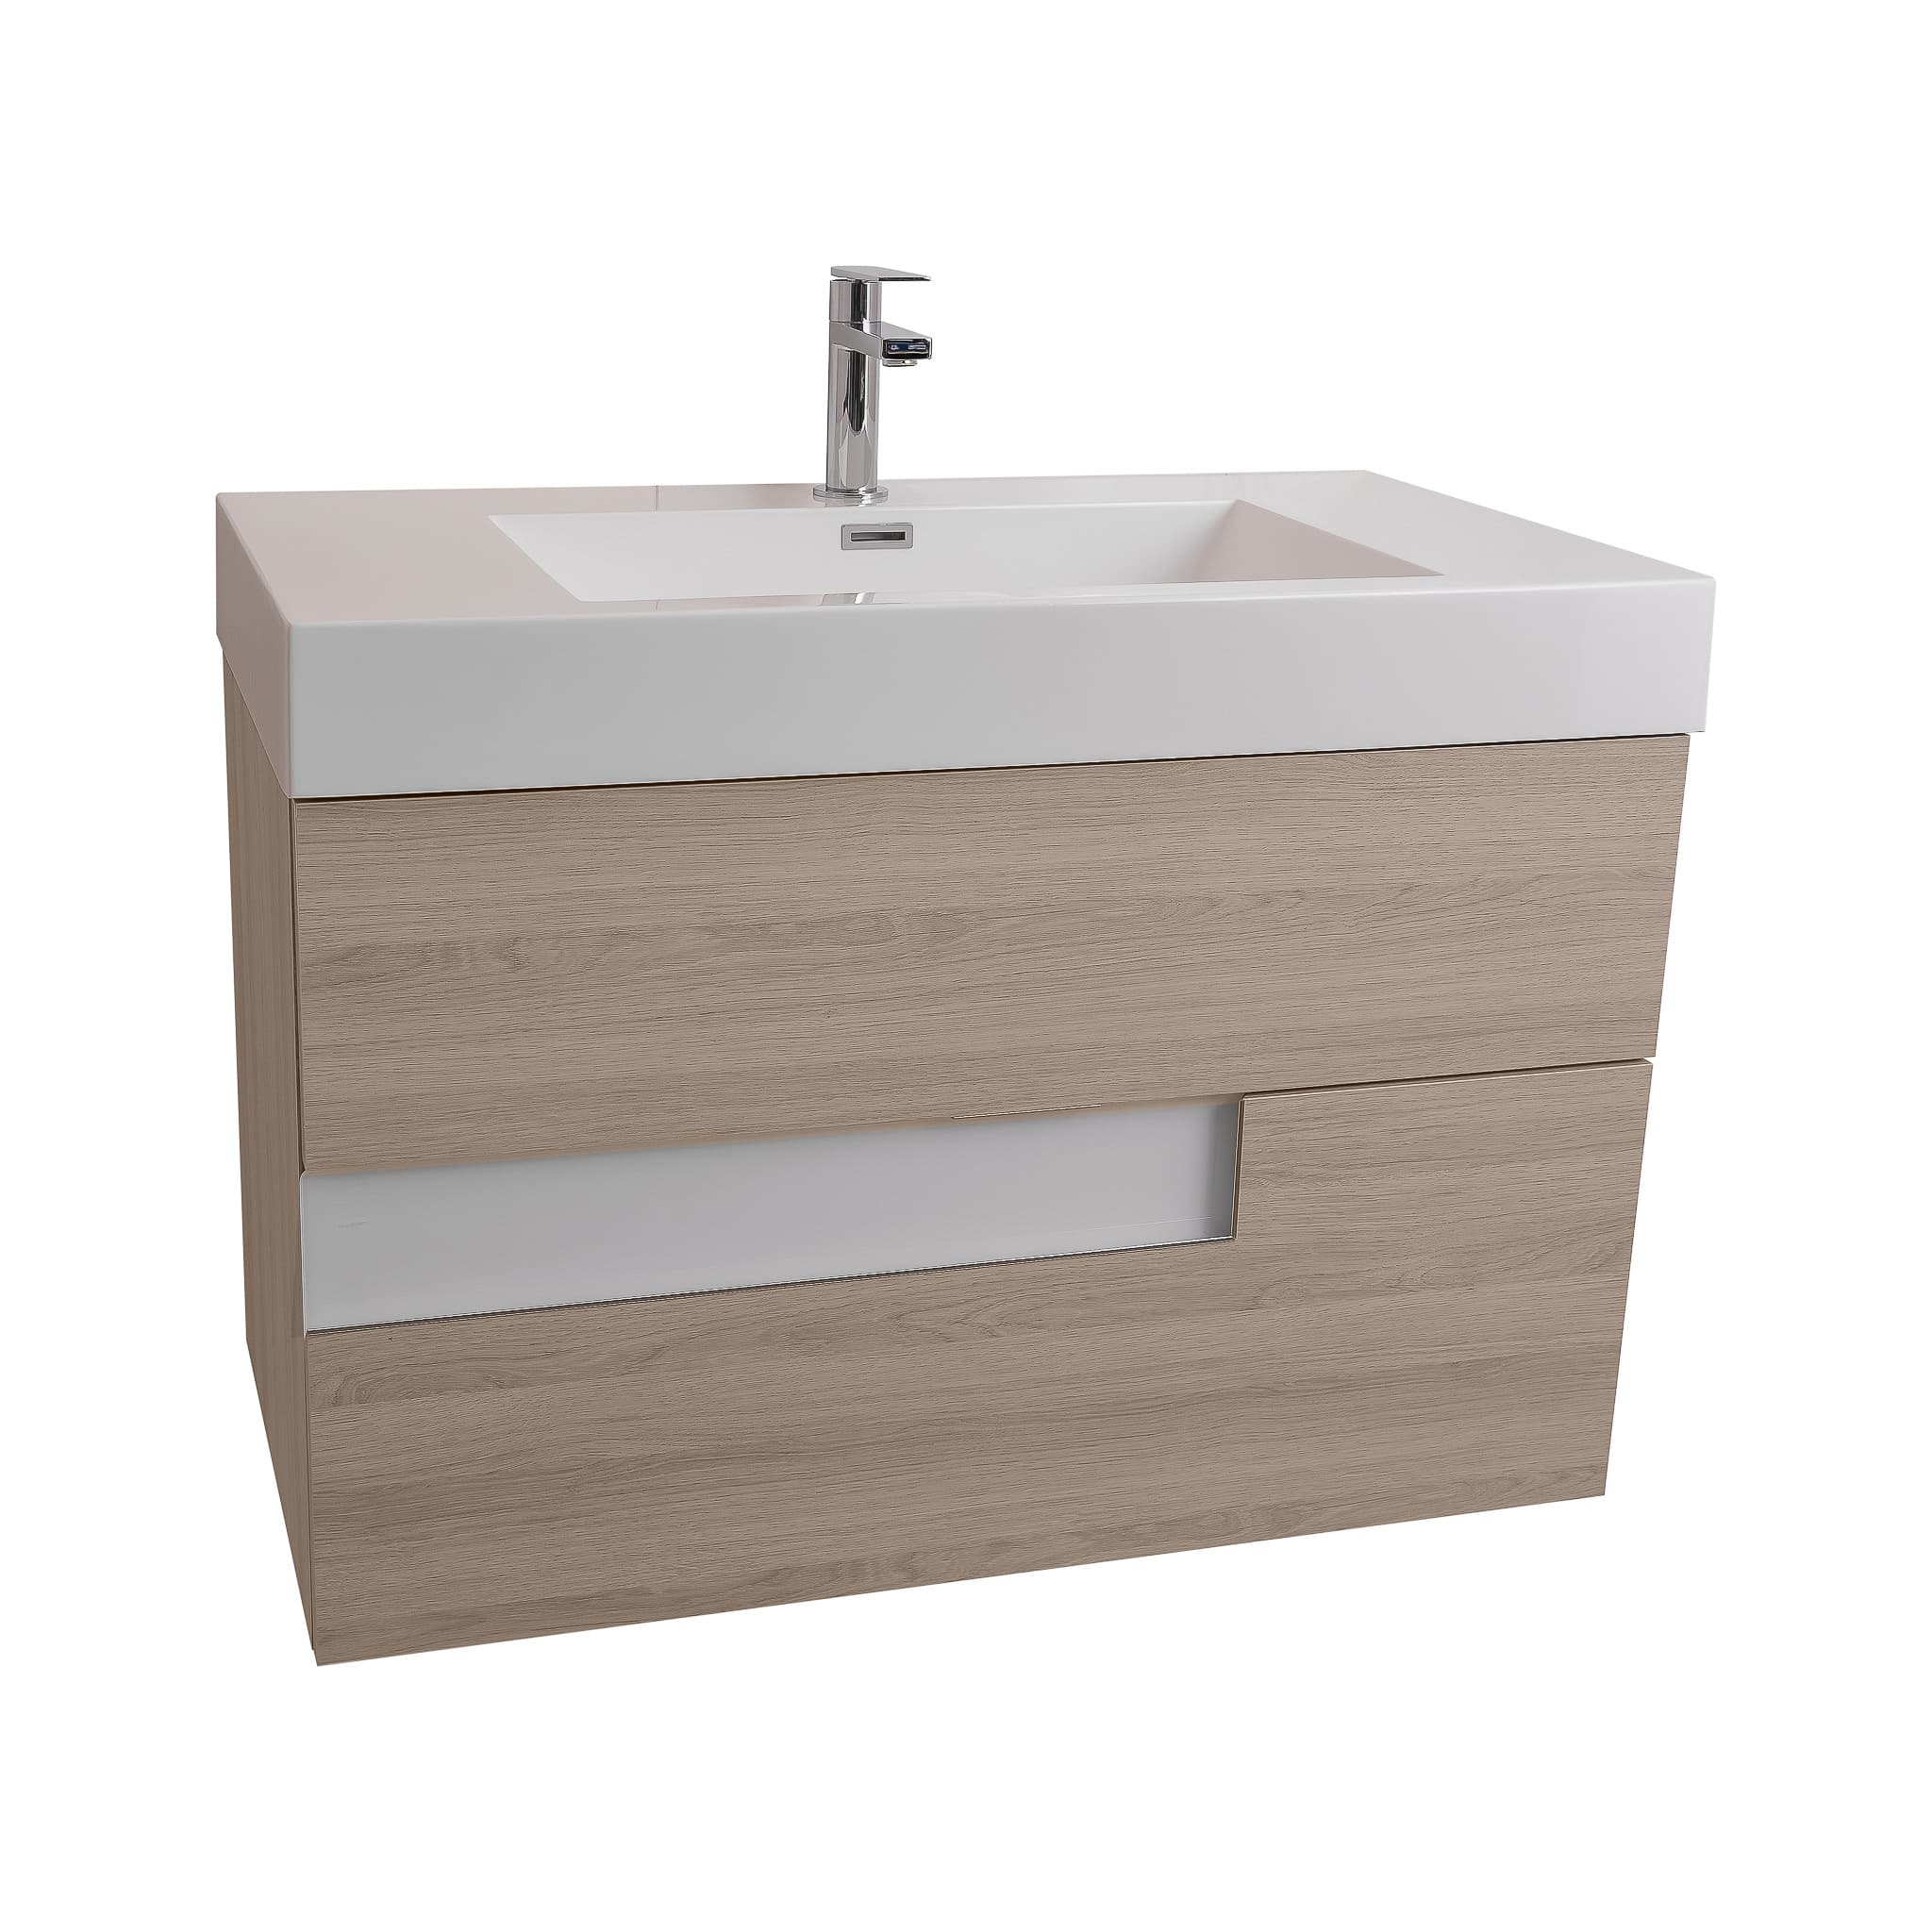 Vision 31.5 Natural Light Wood Cabinet, Square Cultured Marble Sink, Wall Mounted Modern Vanity Set